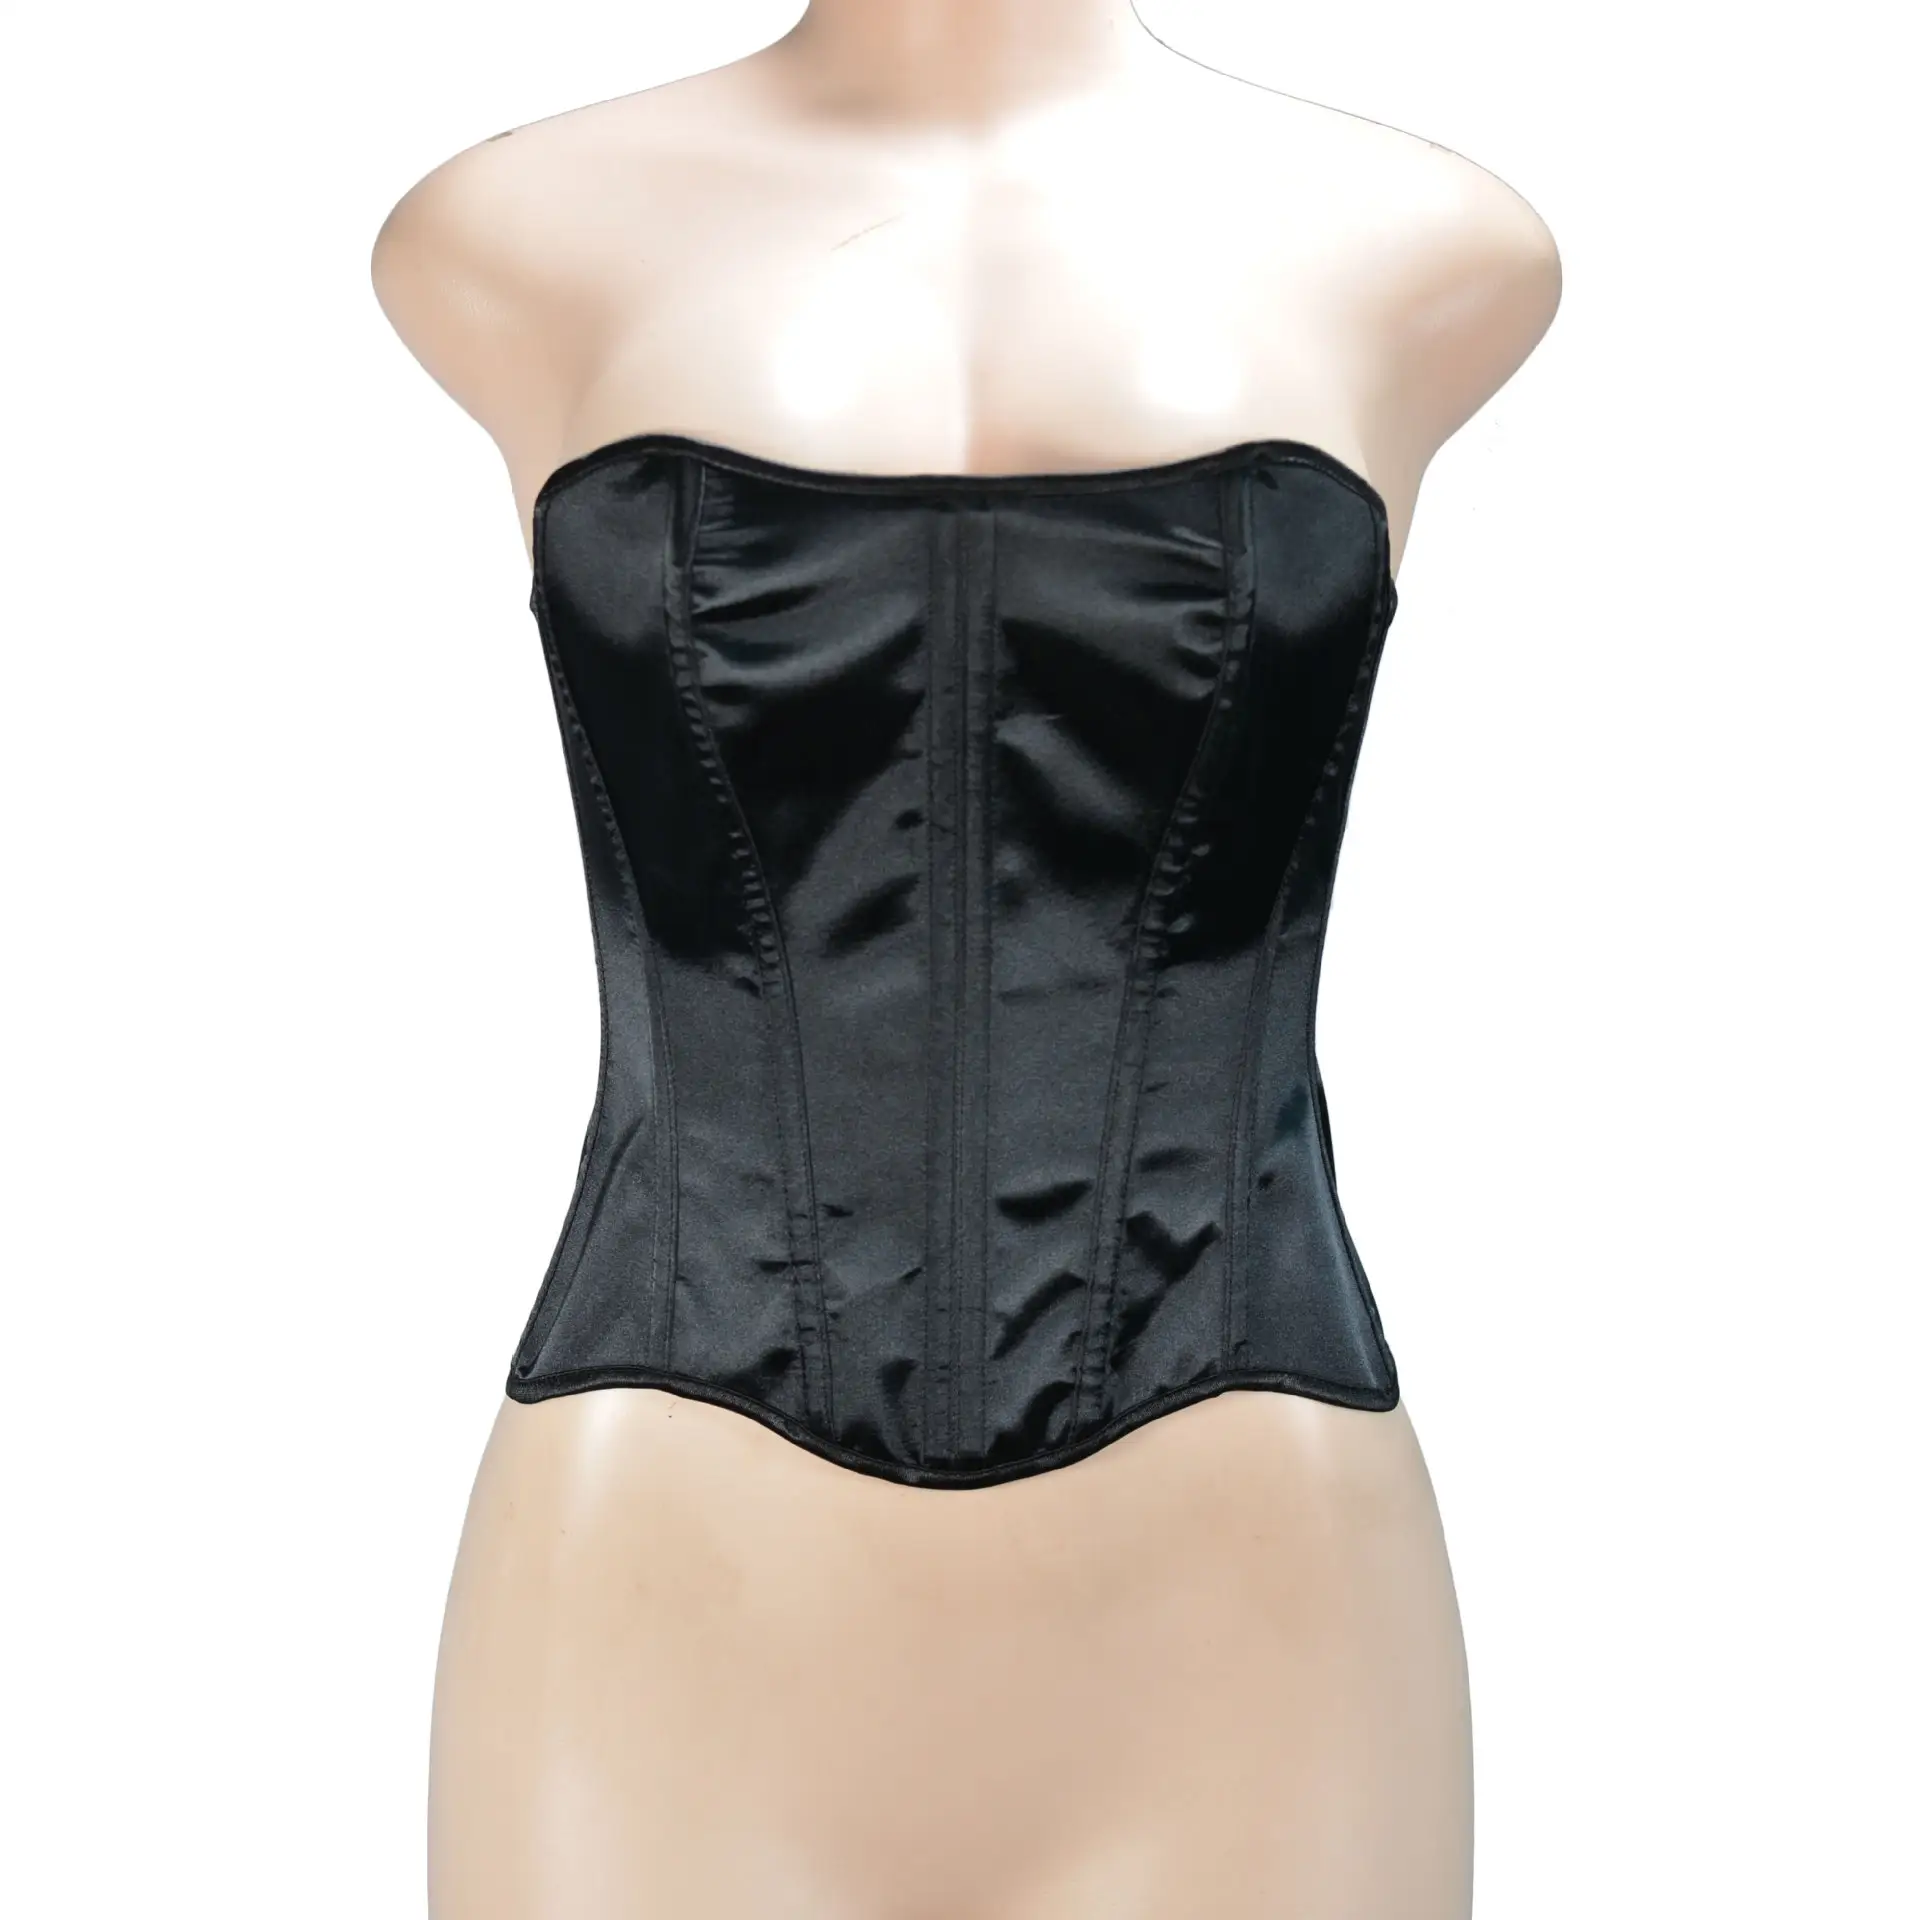 Invisible Body Shapewear Ladies Bustier Waist Training Corset Top